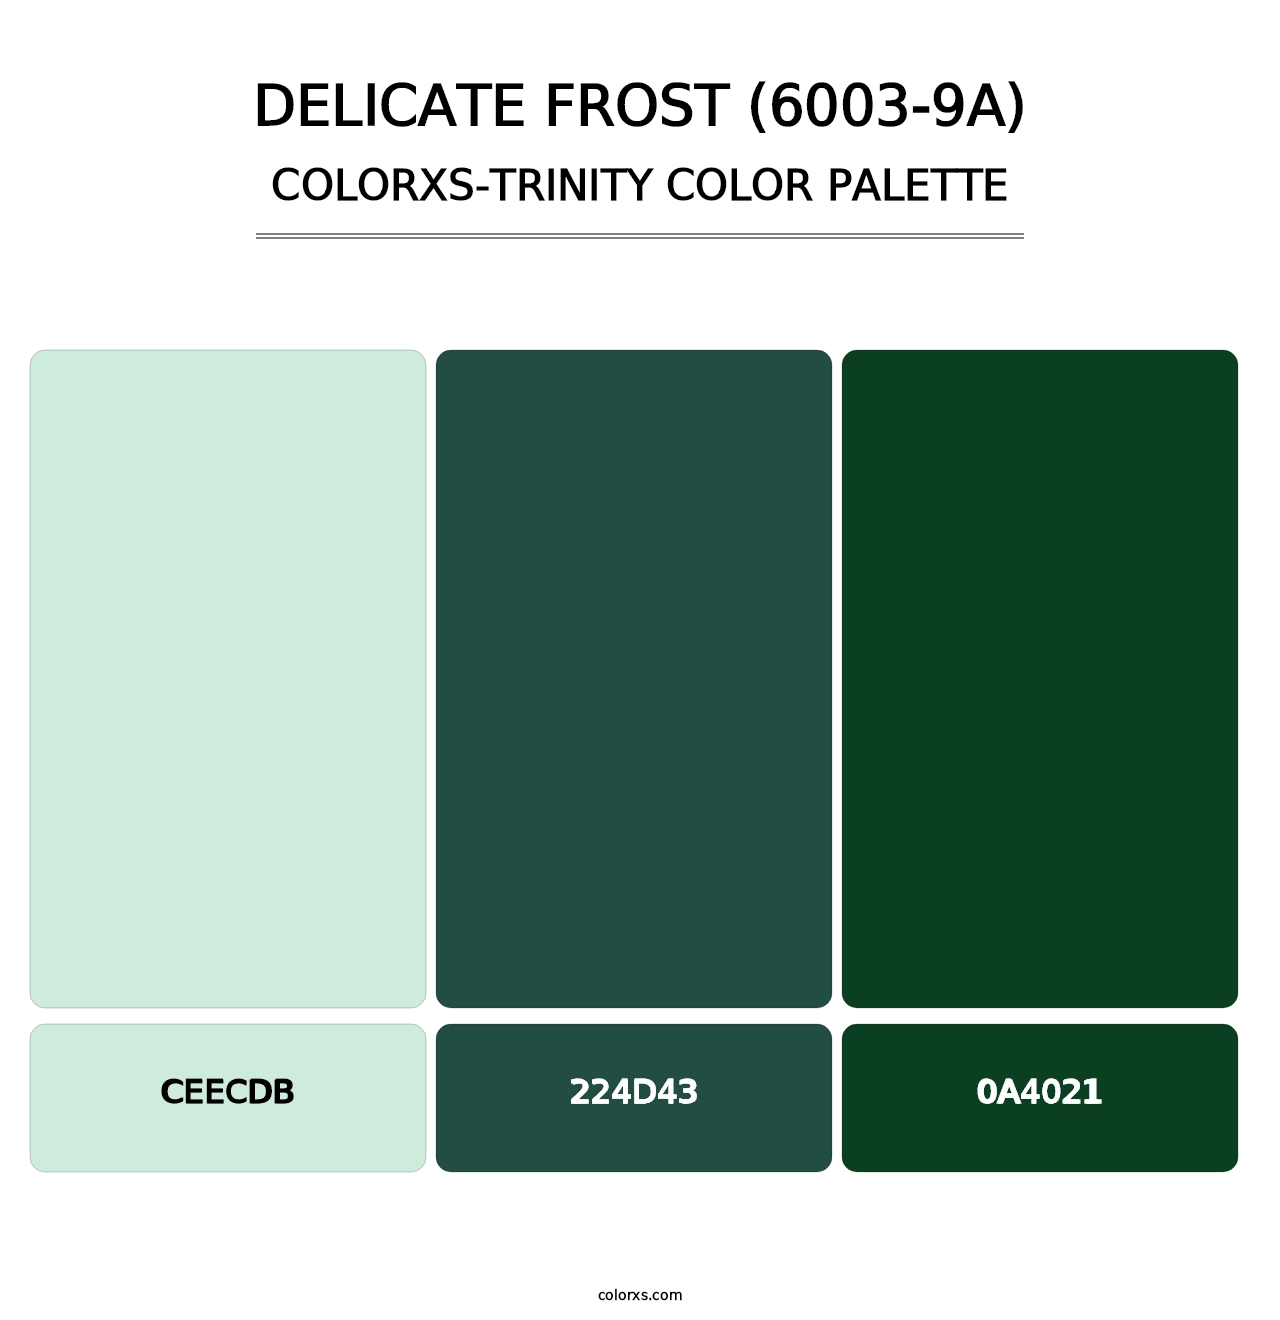 Delicate Frost (6003-9A) - Colorxs Trinity Palette